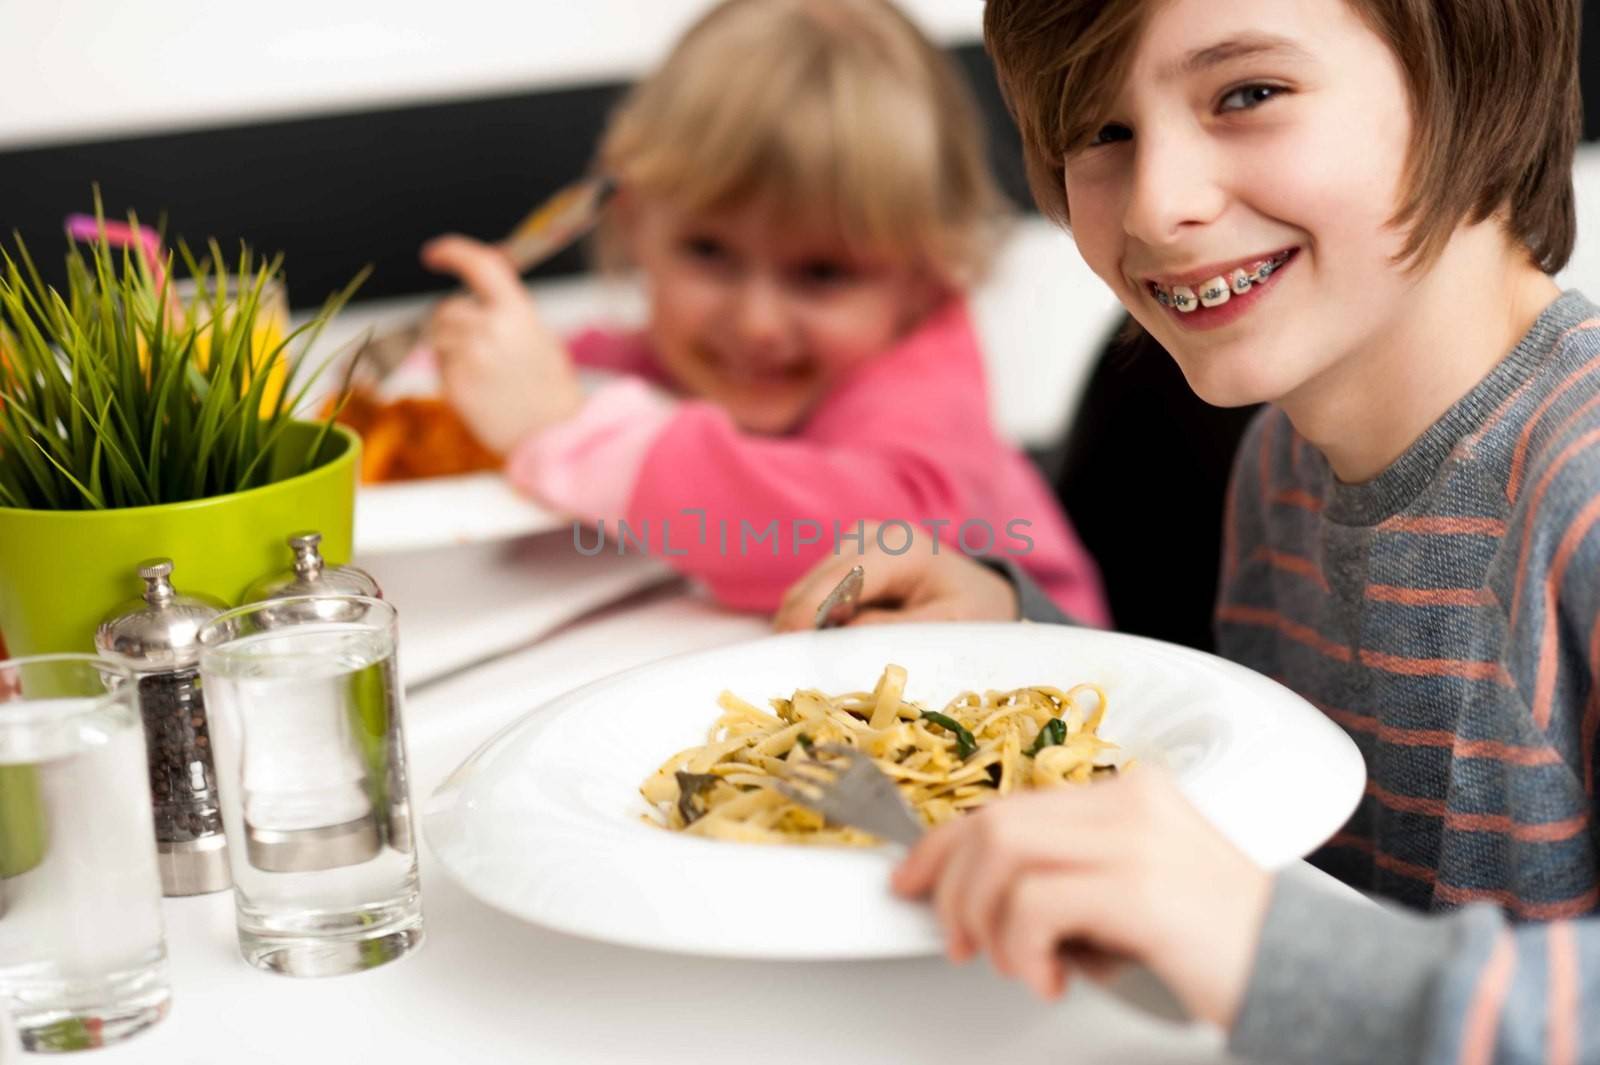 Children enjoying their meals by stockyimages